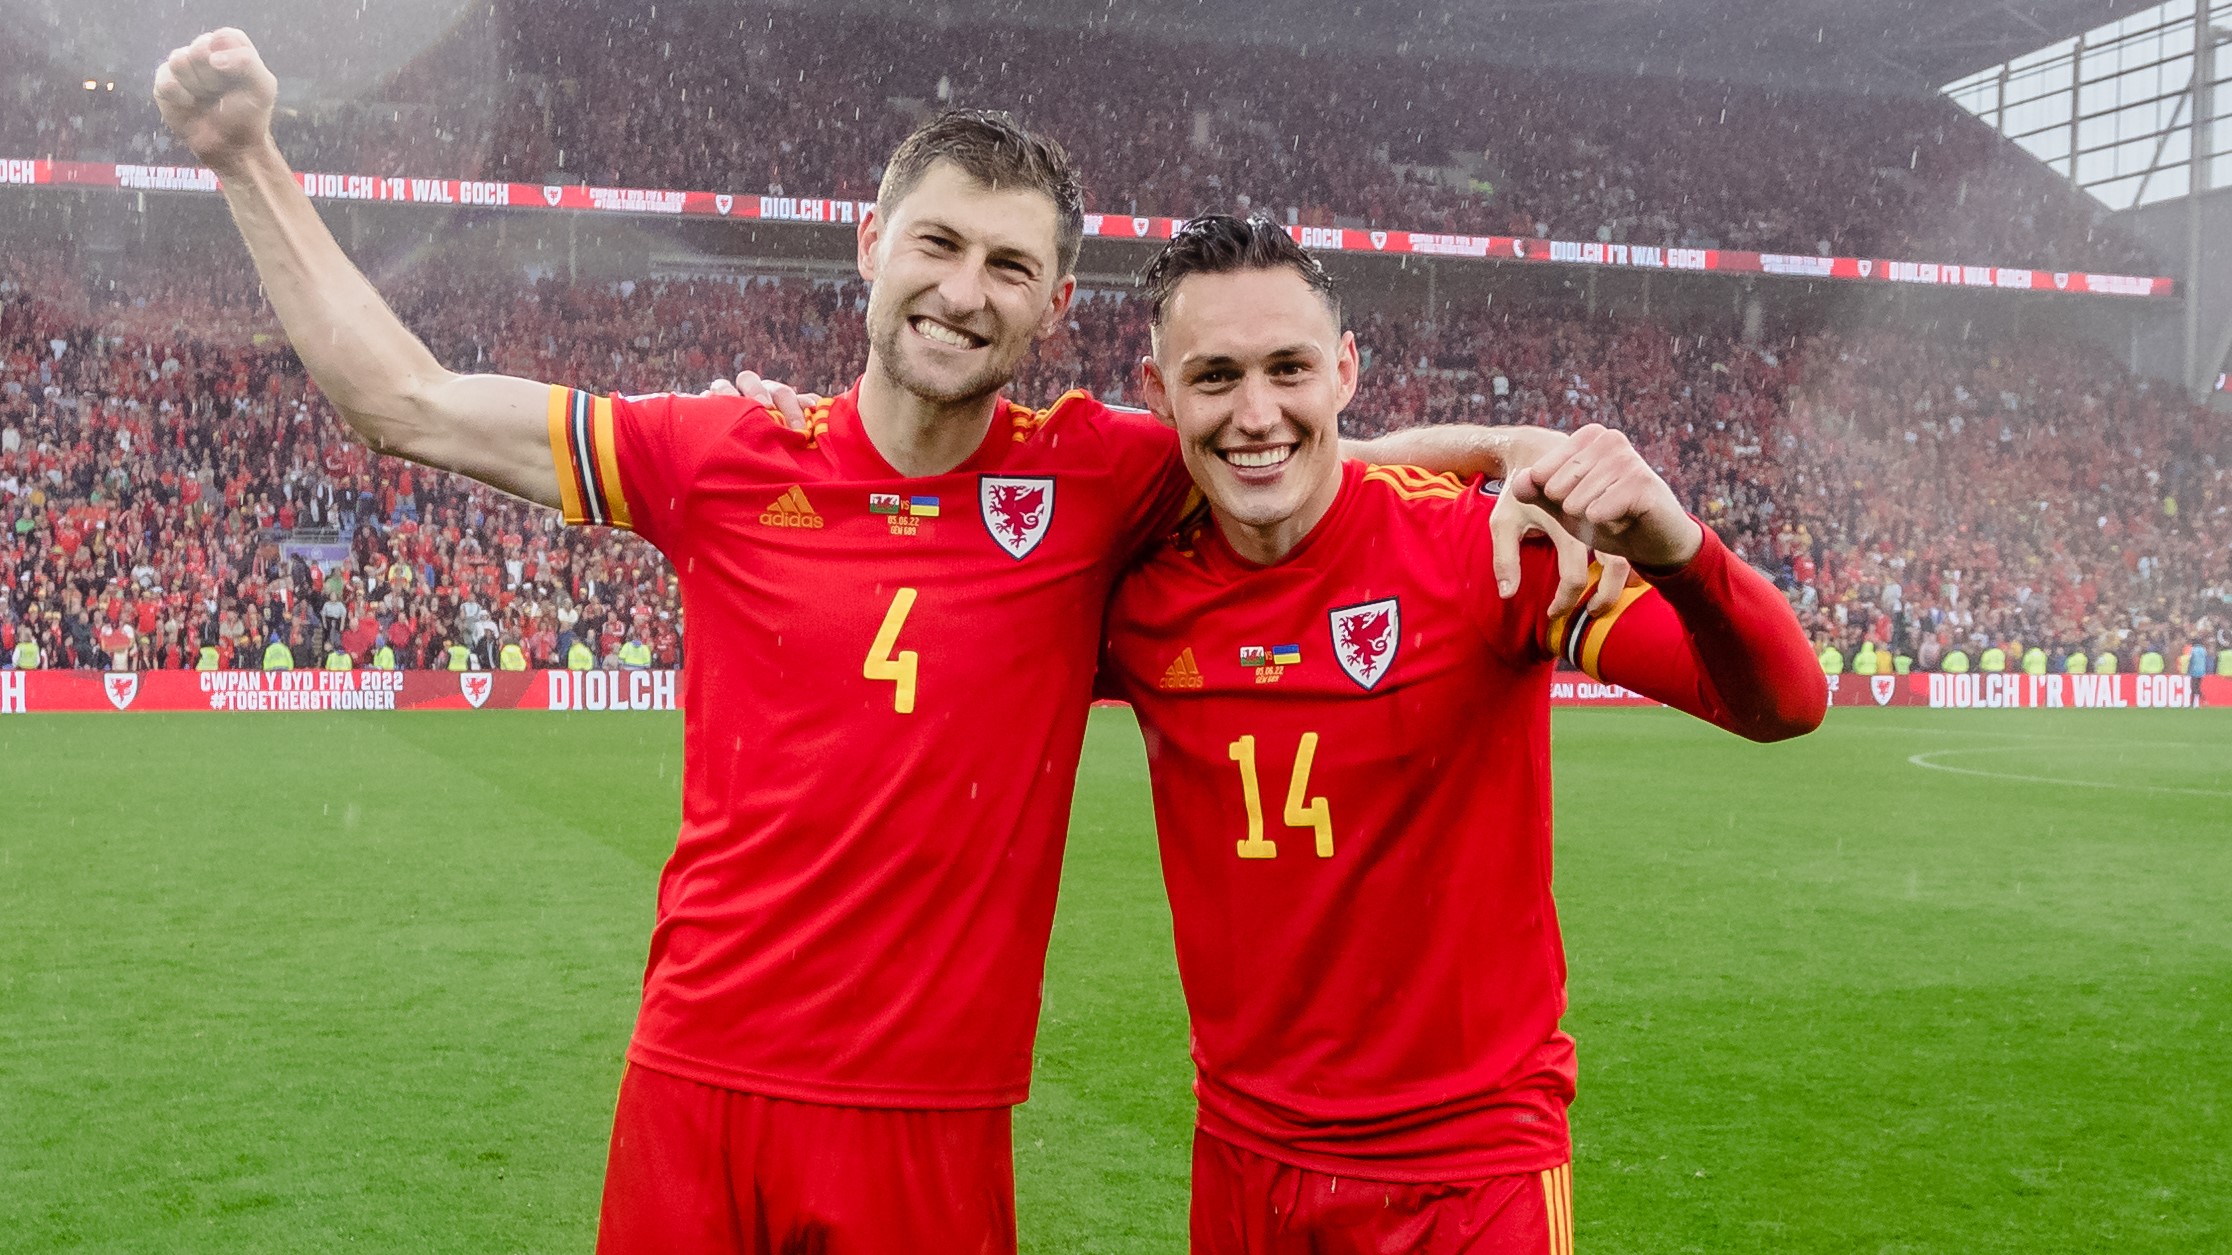 Ben Davies and Connor Roberts stand together celebrating Wales qualifying for the world cup